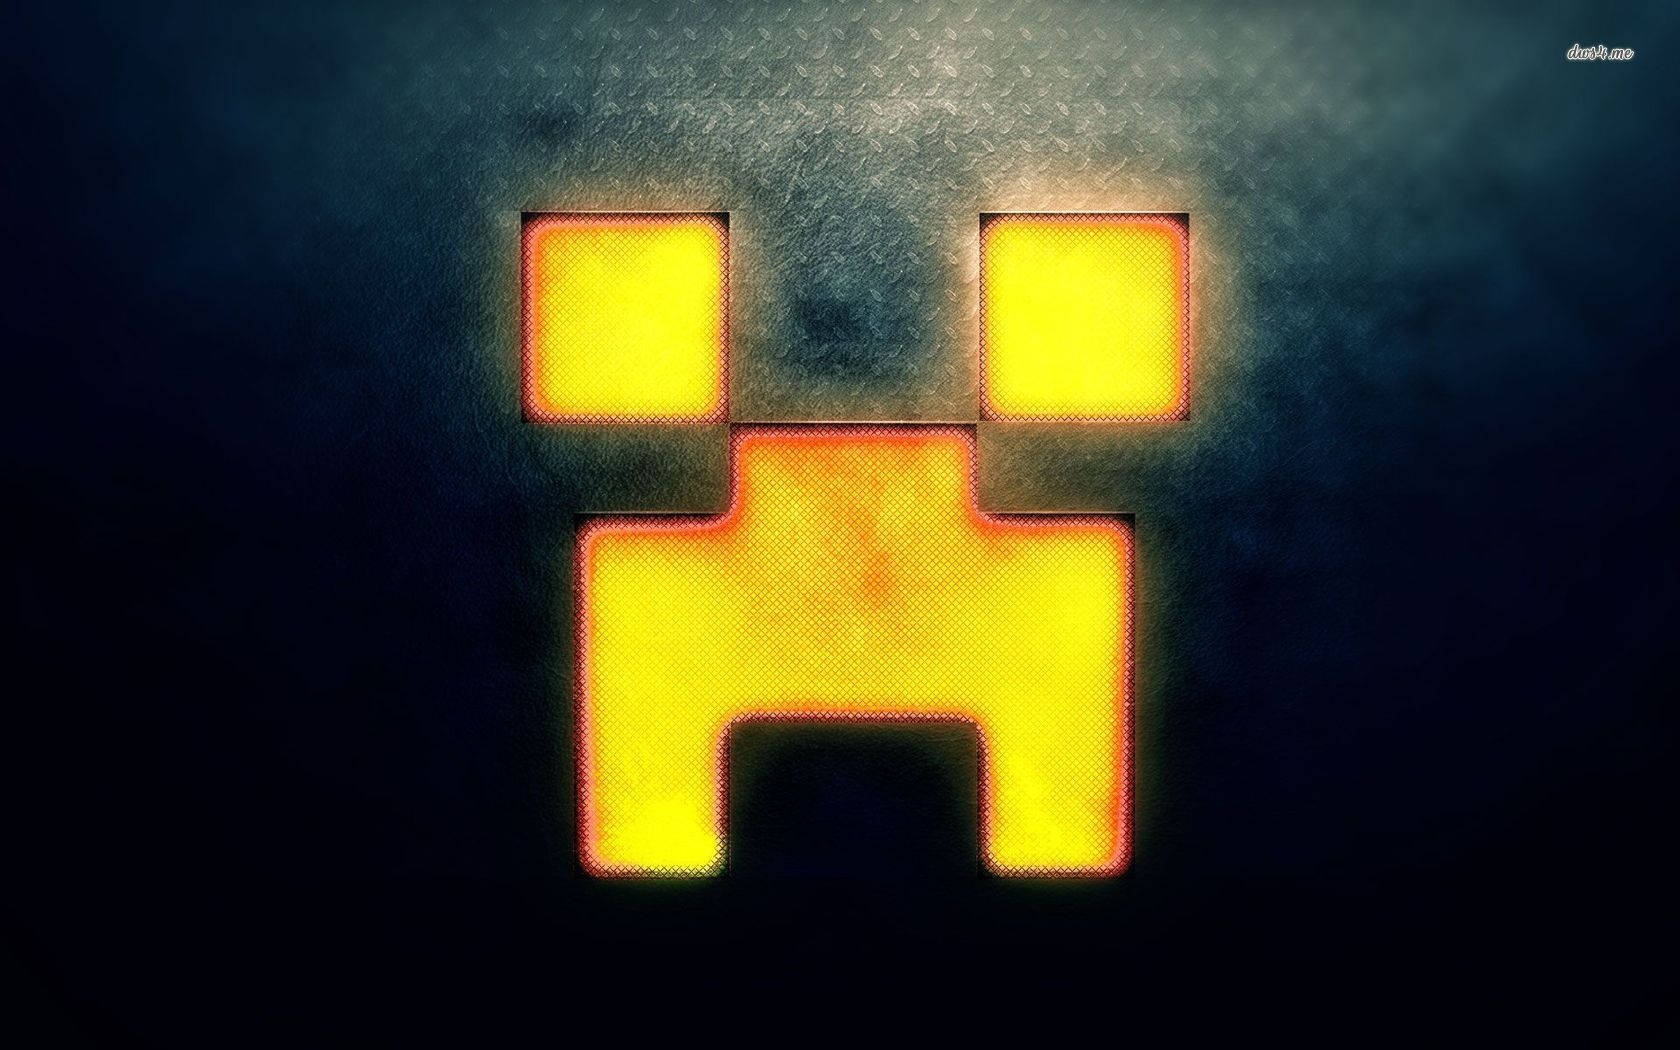 Glow up with this Minecraft Creeper Face Wallpaper